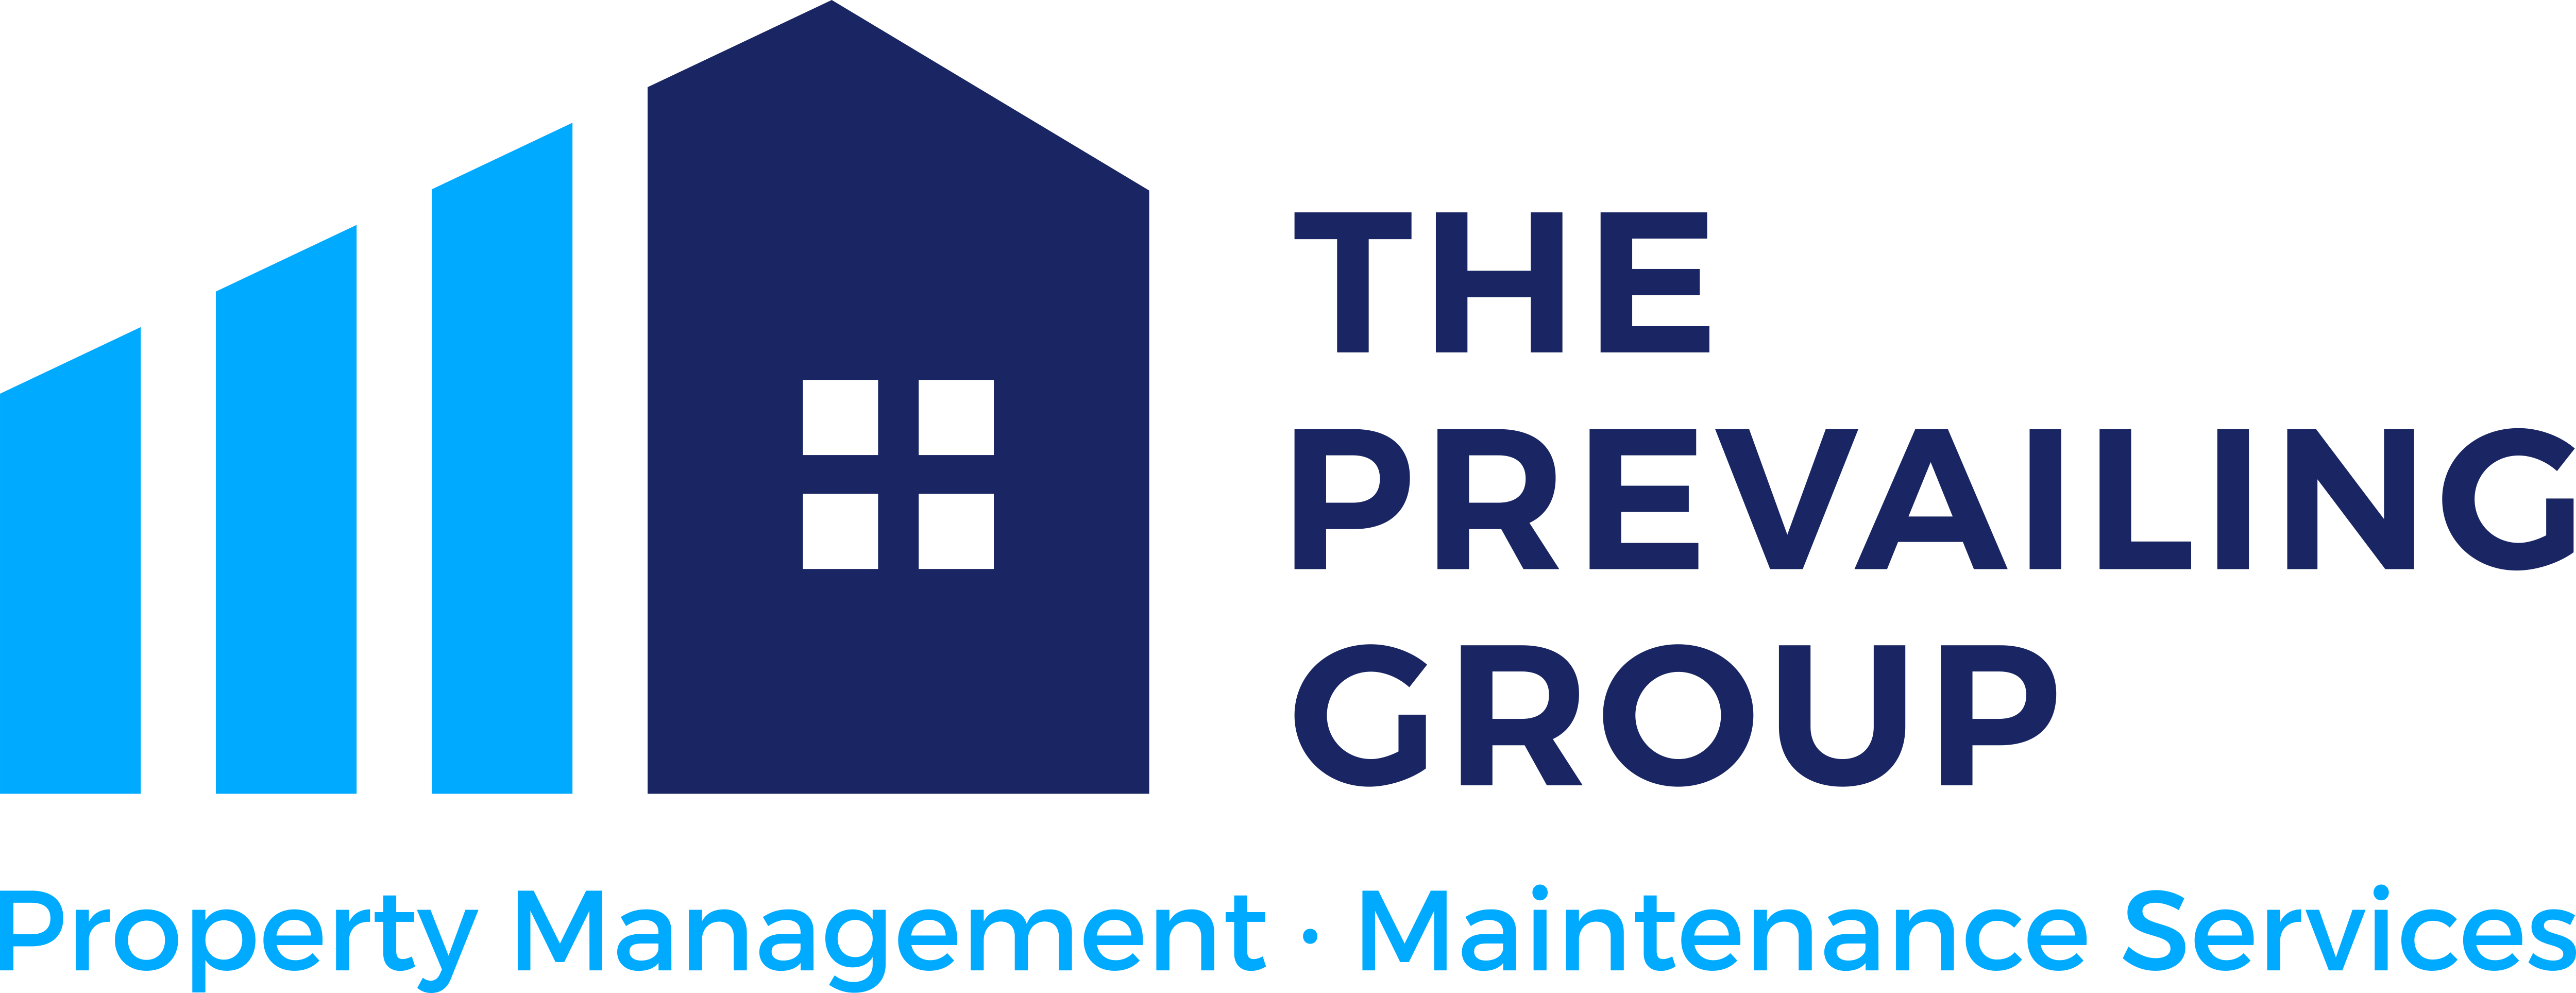 The Prevailing Group logo